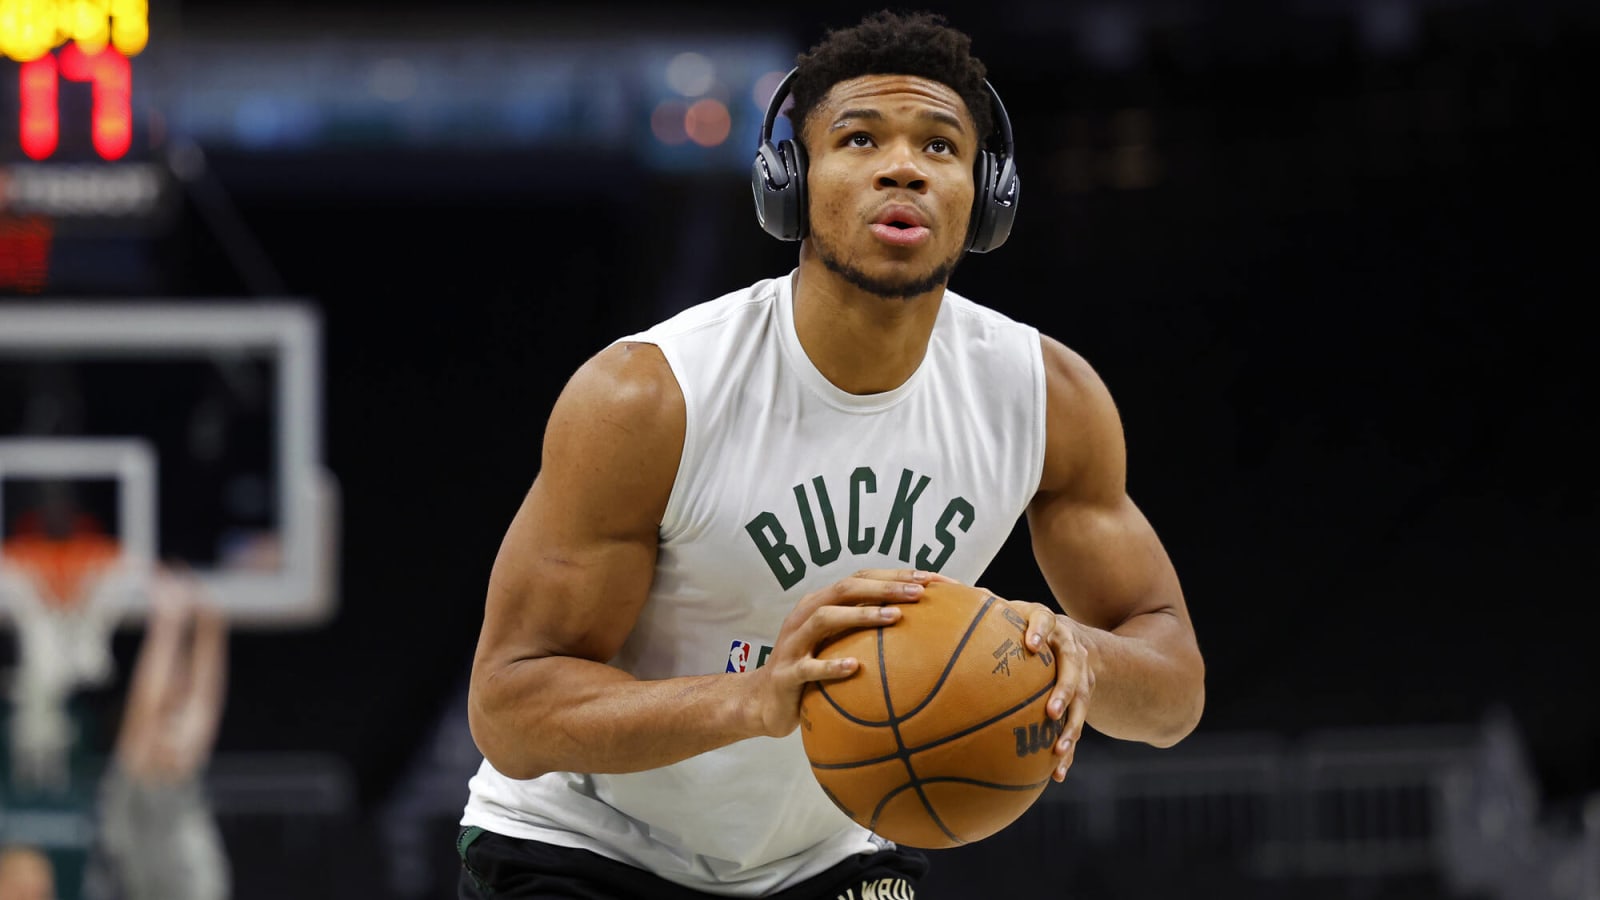 Giannis Antetokounmpo cleared to practice following minor ankle sprain